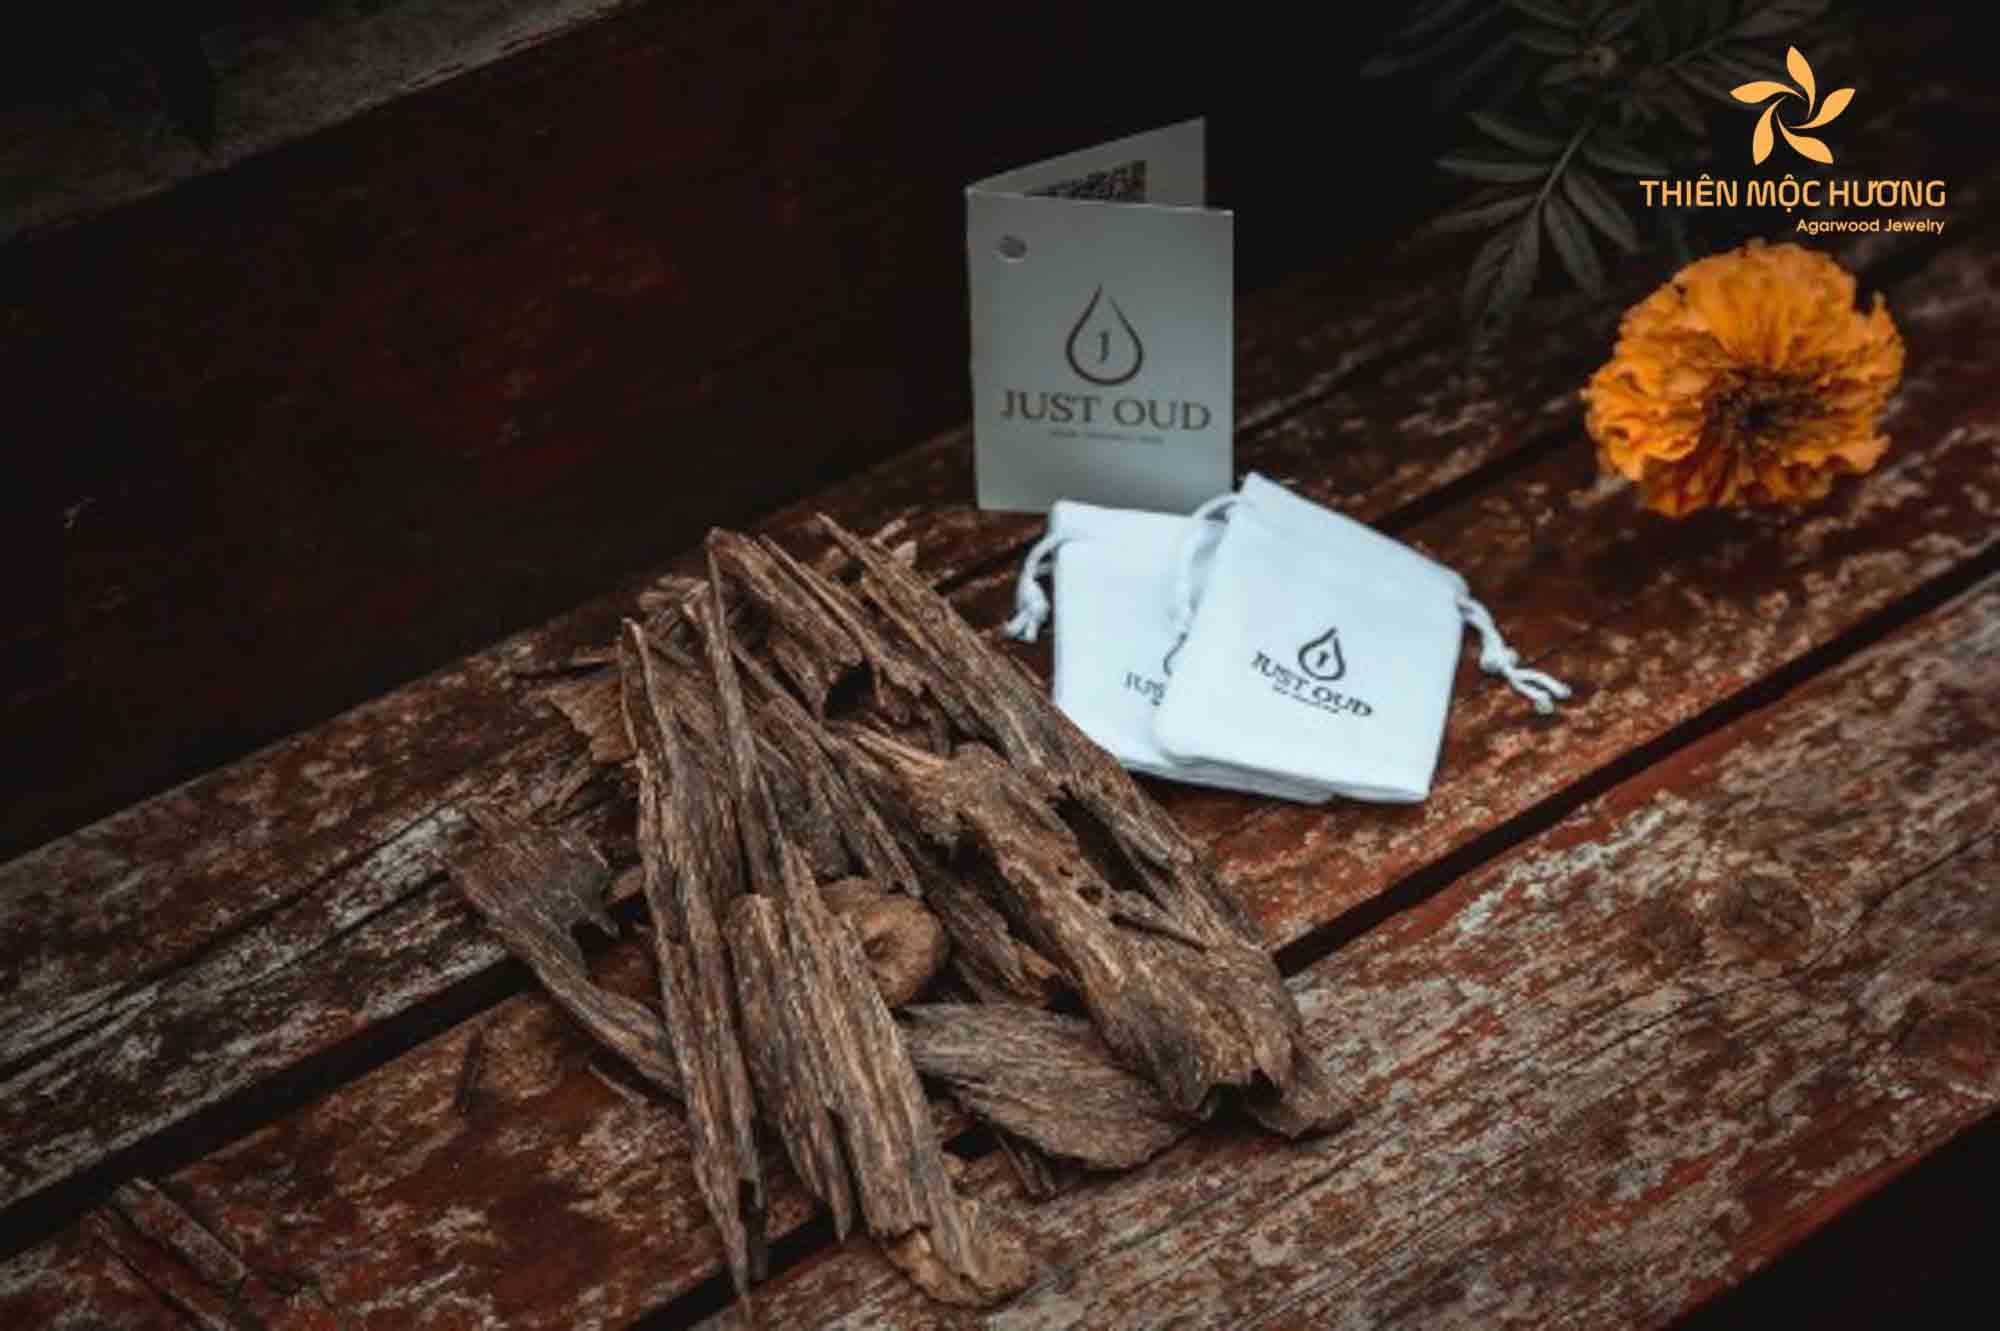 Just Oud Shop - Top Agarwood store in Taiwan